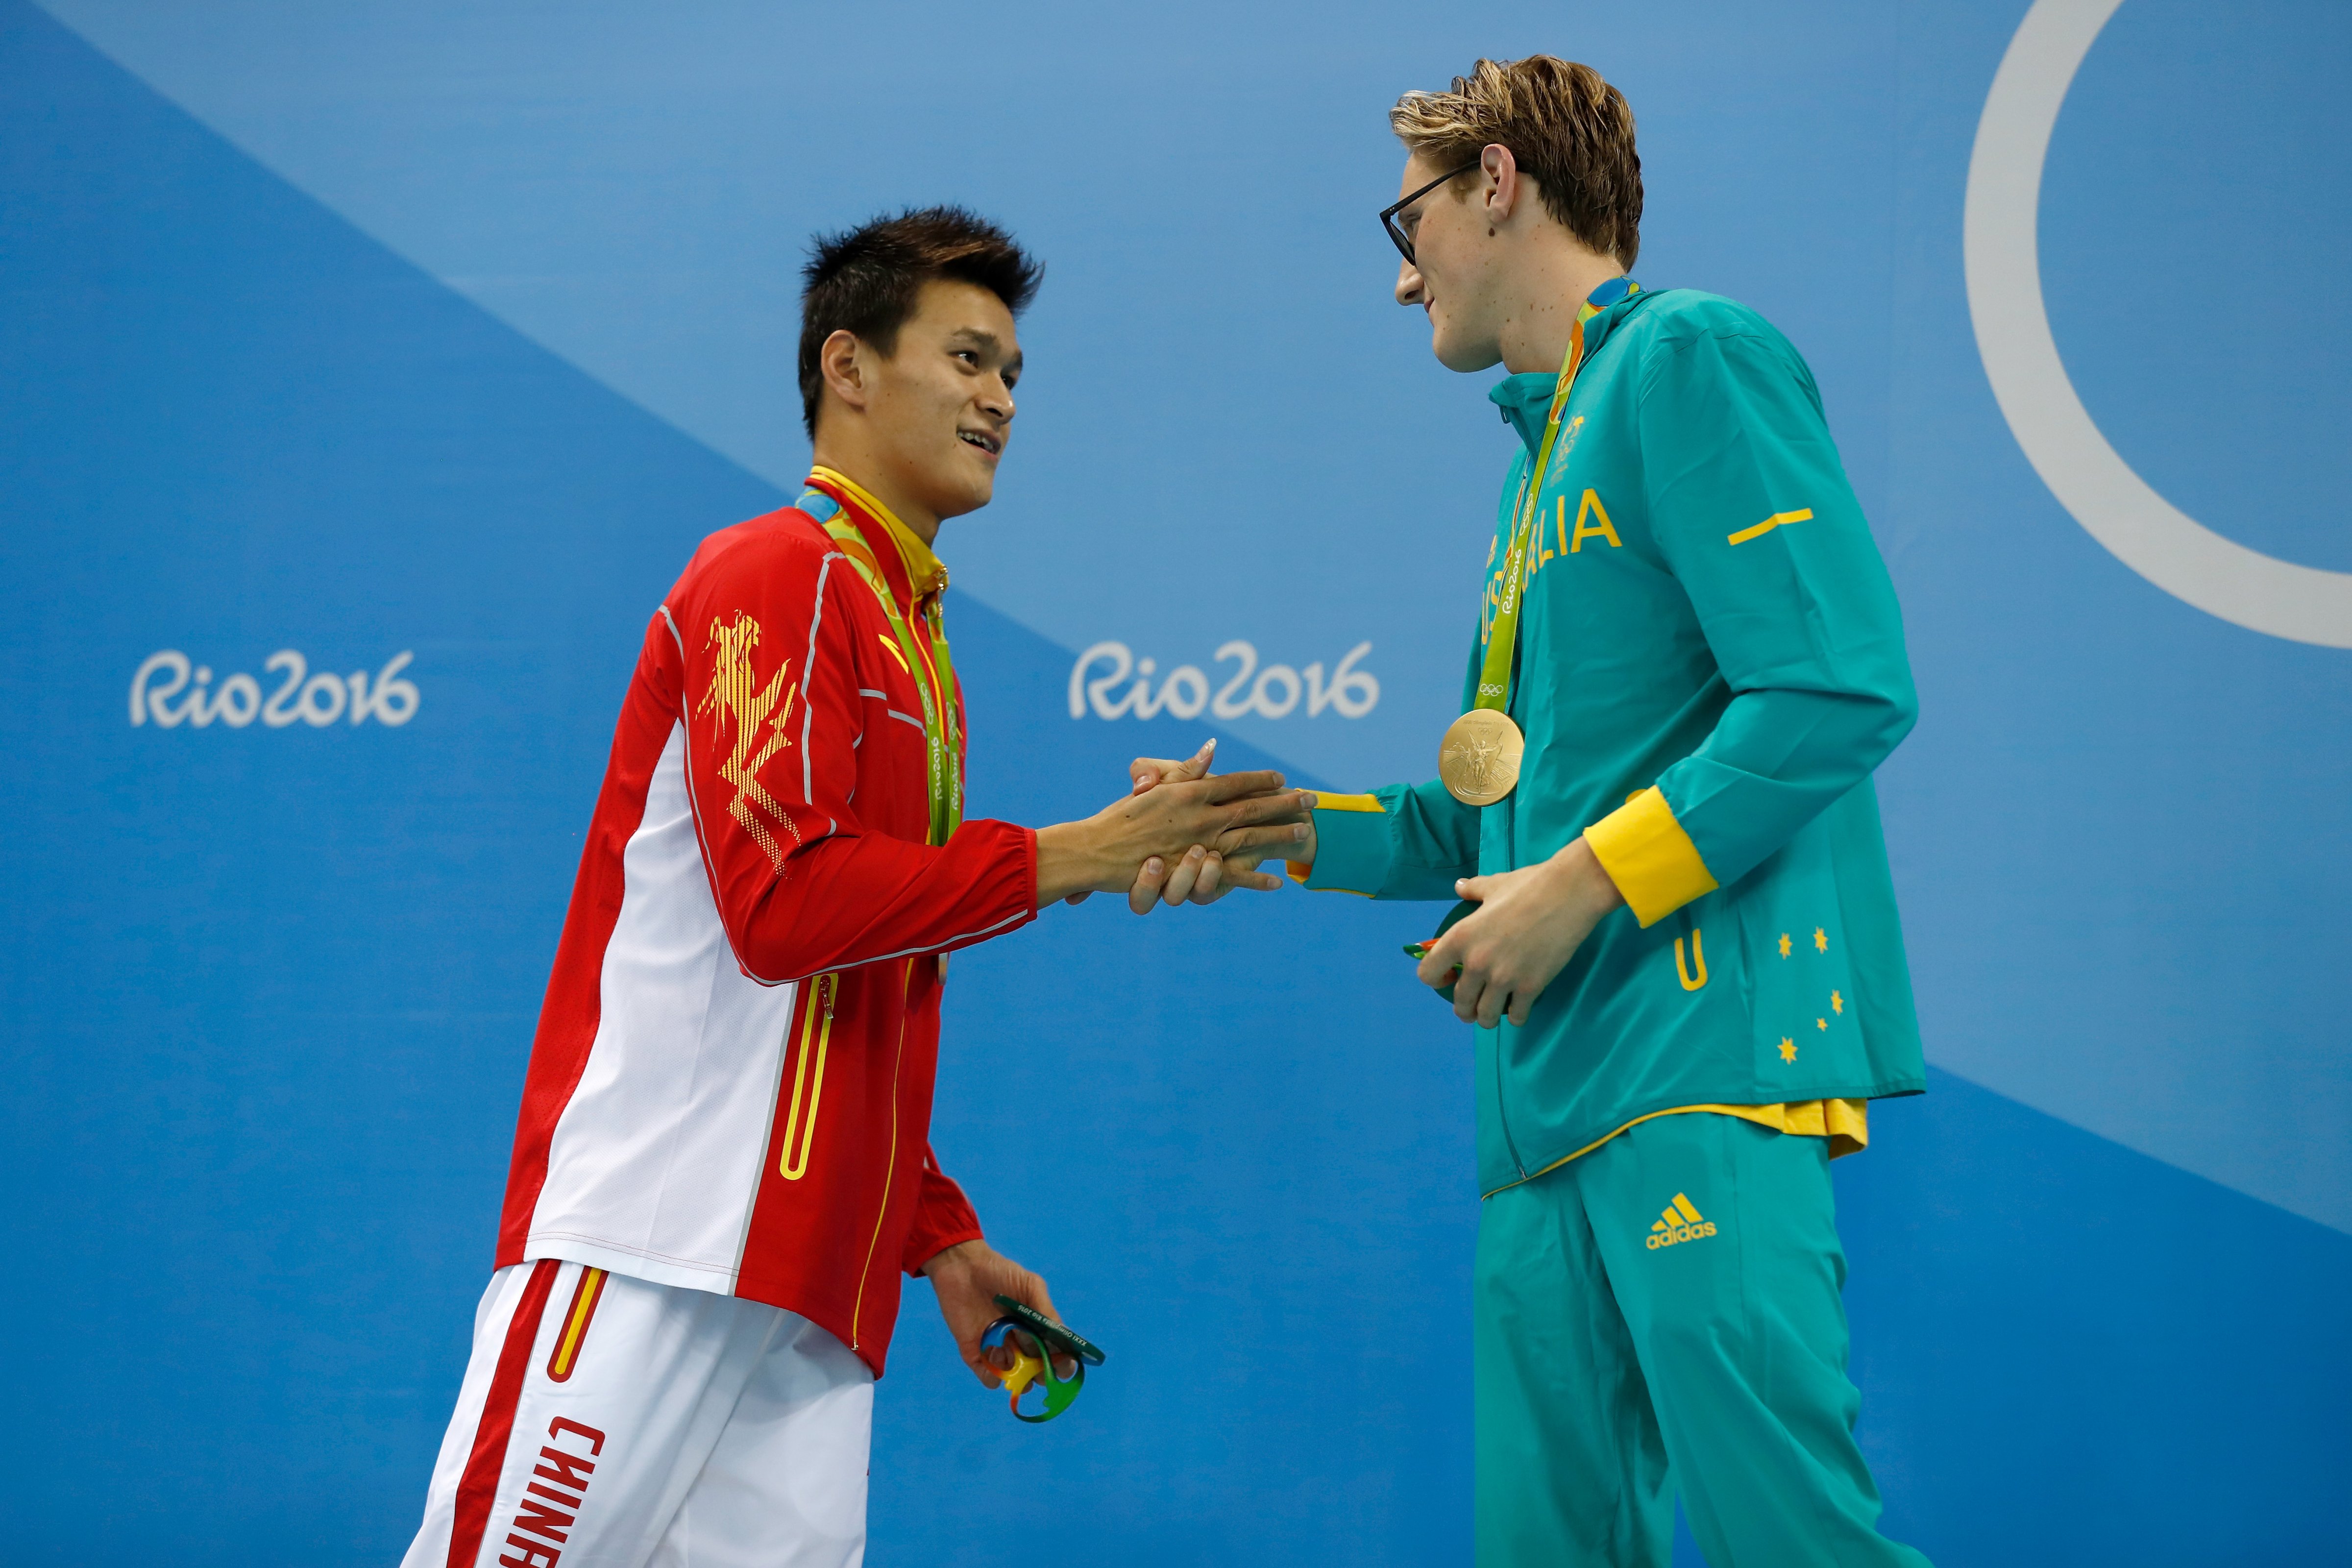 (L-R) Silver medalist Sun Yang of China and gold medal medallist Mack Horton of Australia pose during the medal ceremony for the Final of the Men's 400m Freestyle on Day 1 of the Rio 2016 Olympic Games at the Olympic Aquatics Stadium on August 6, 2016 in Rio de Janeiro, Brazil. (Clive Rose—Getty Images)